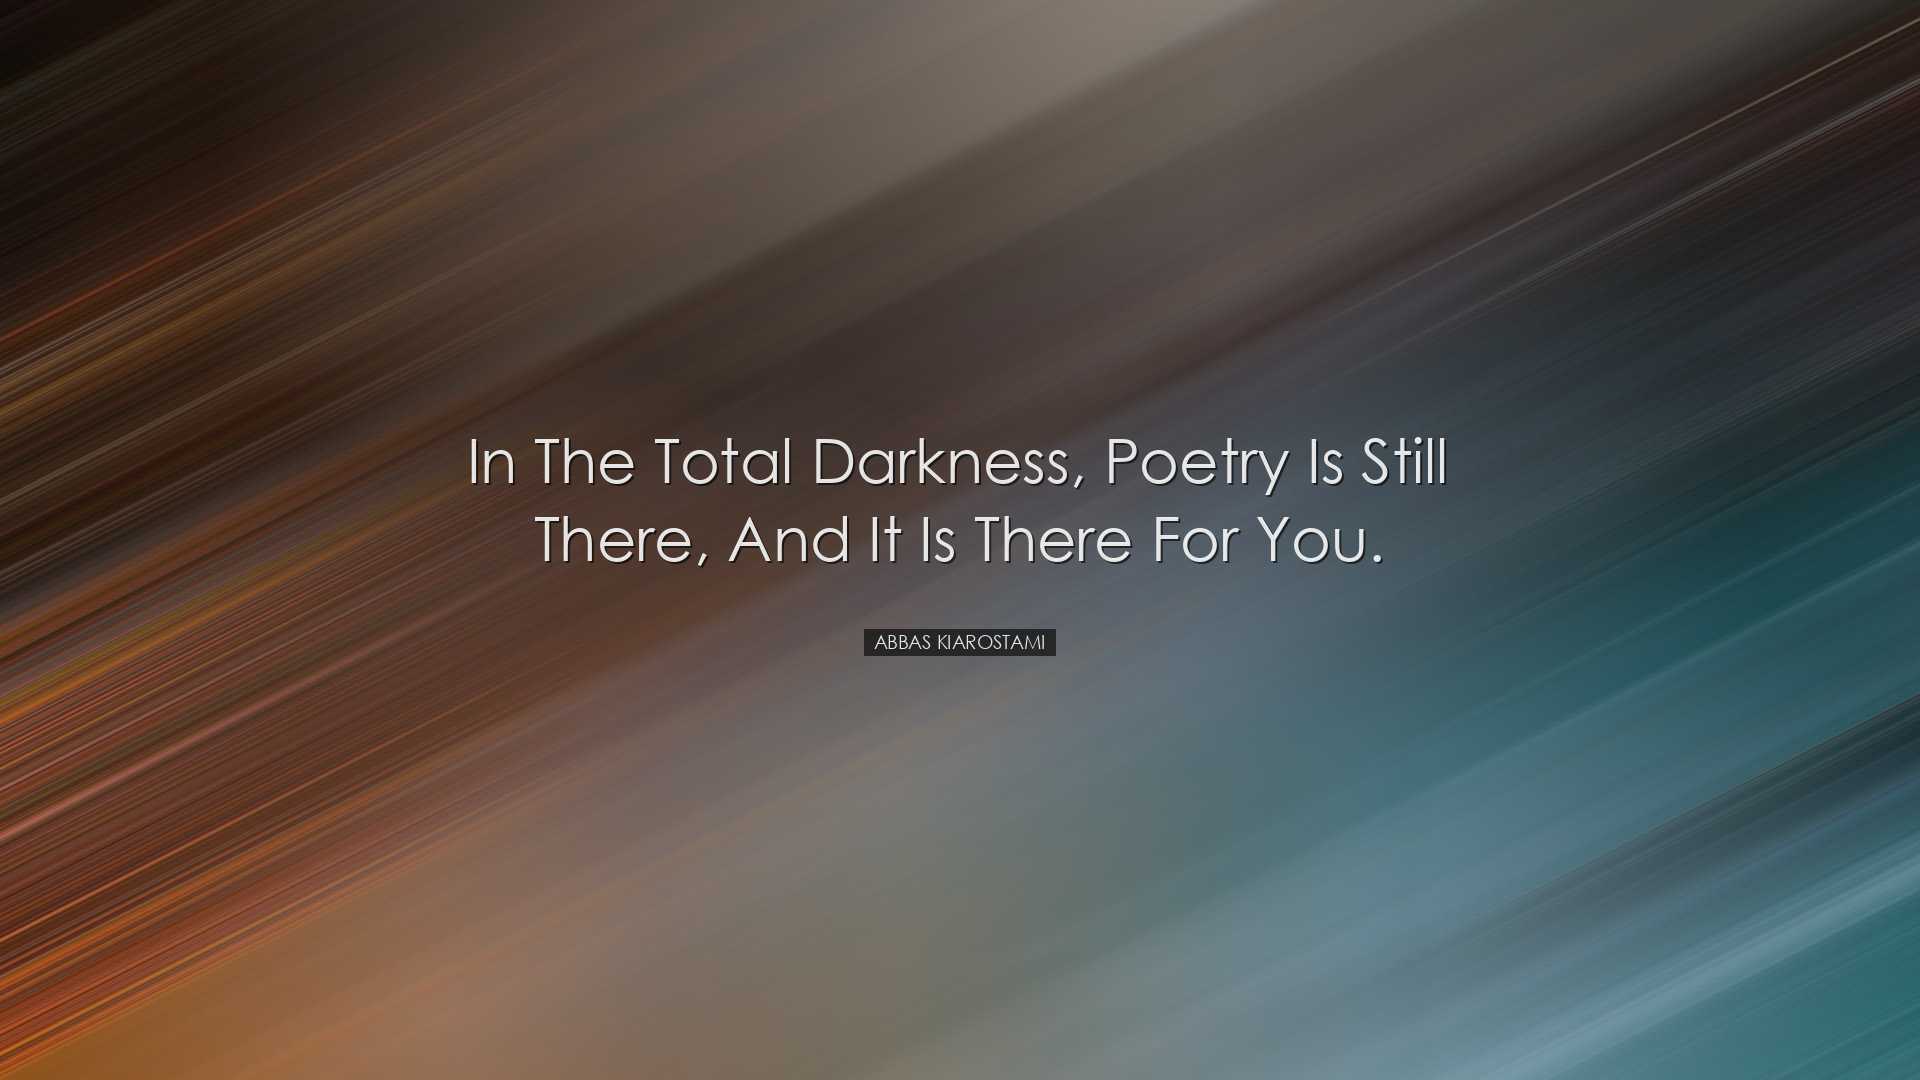 In the total darkness, poetry is still there, and it is there for